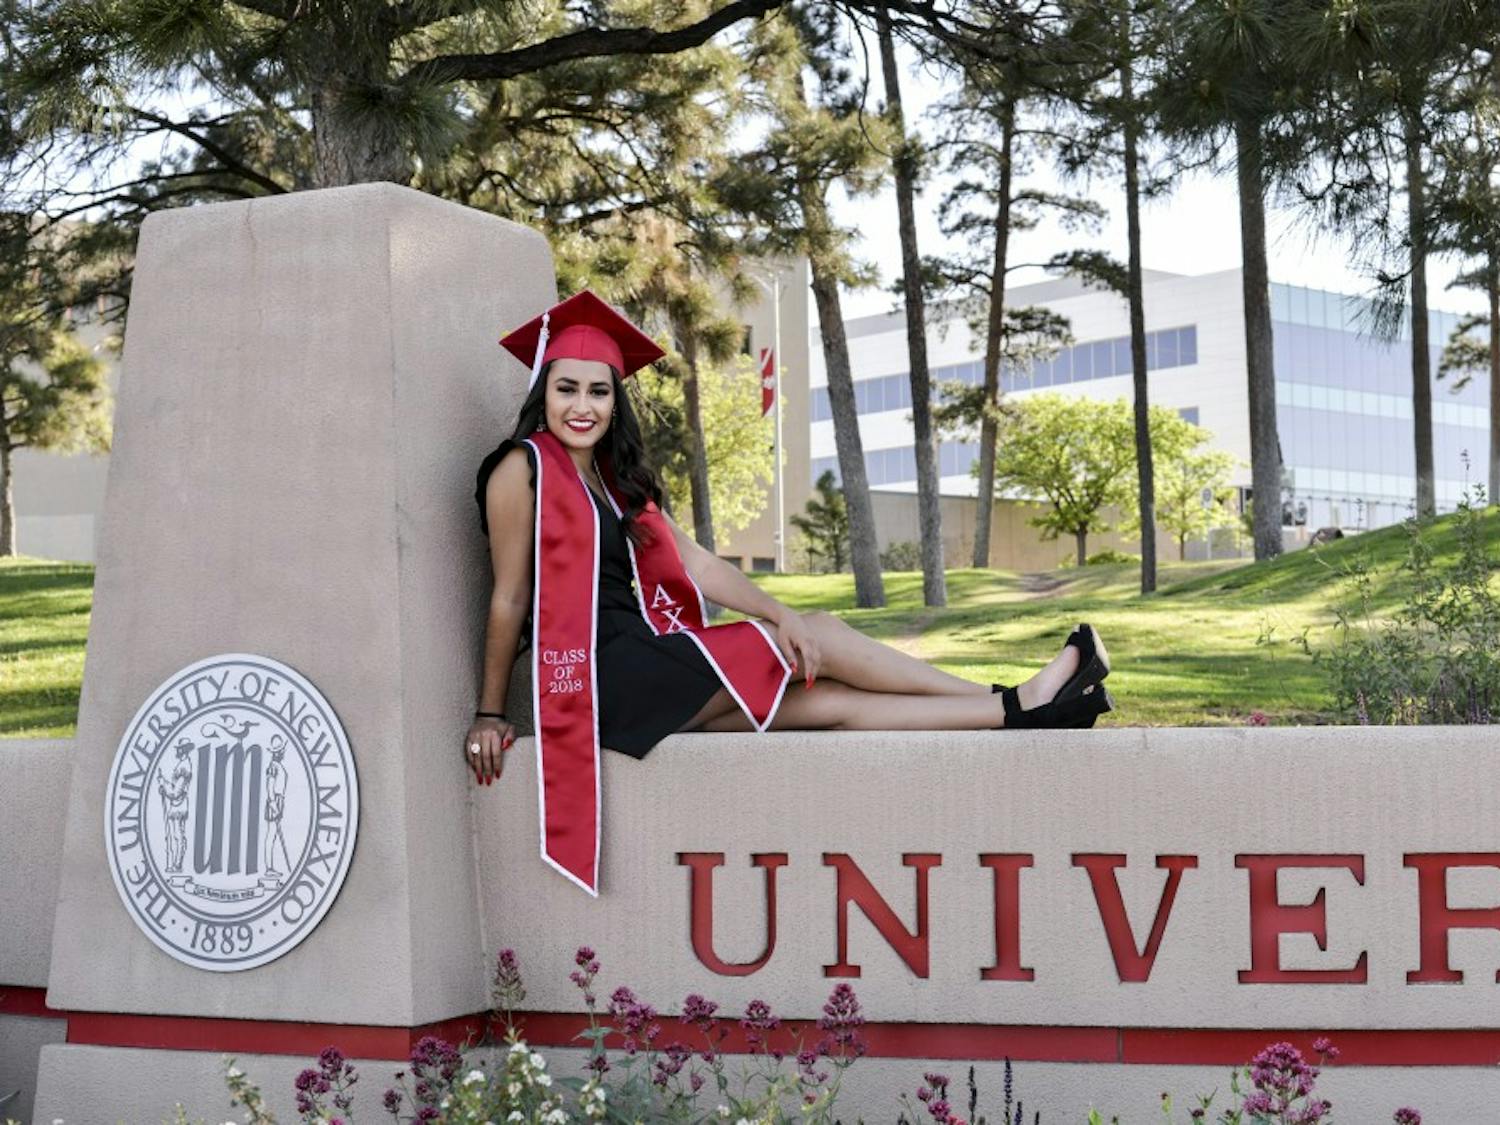 Marilyn Caro poses on the University of New Mexico sign for senior pictures on April 28, 2018. She graduates on May 12, with a double major in international studies and Spanish.